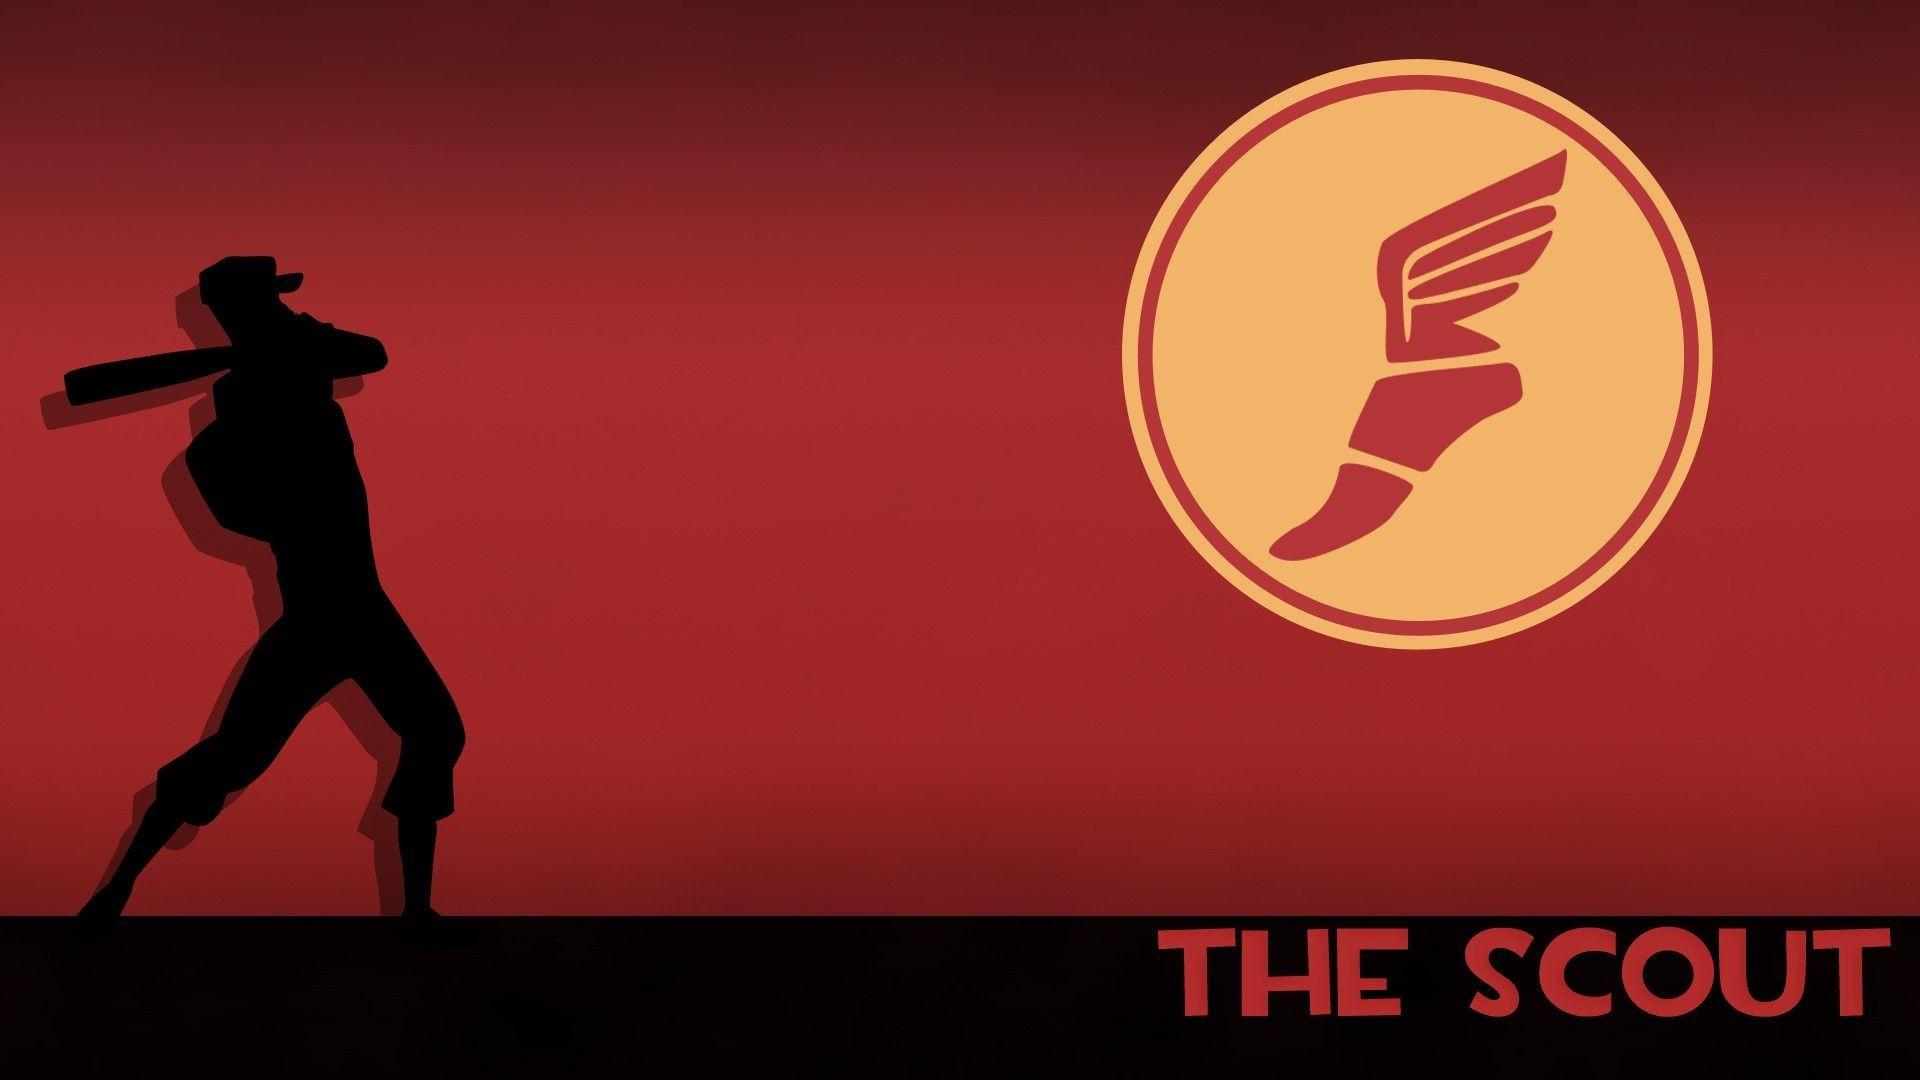 Team Fortress 2 Scout Wallpapers Wallpaper Cave